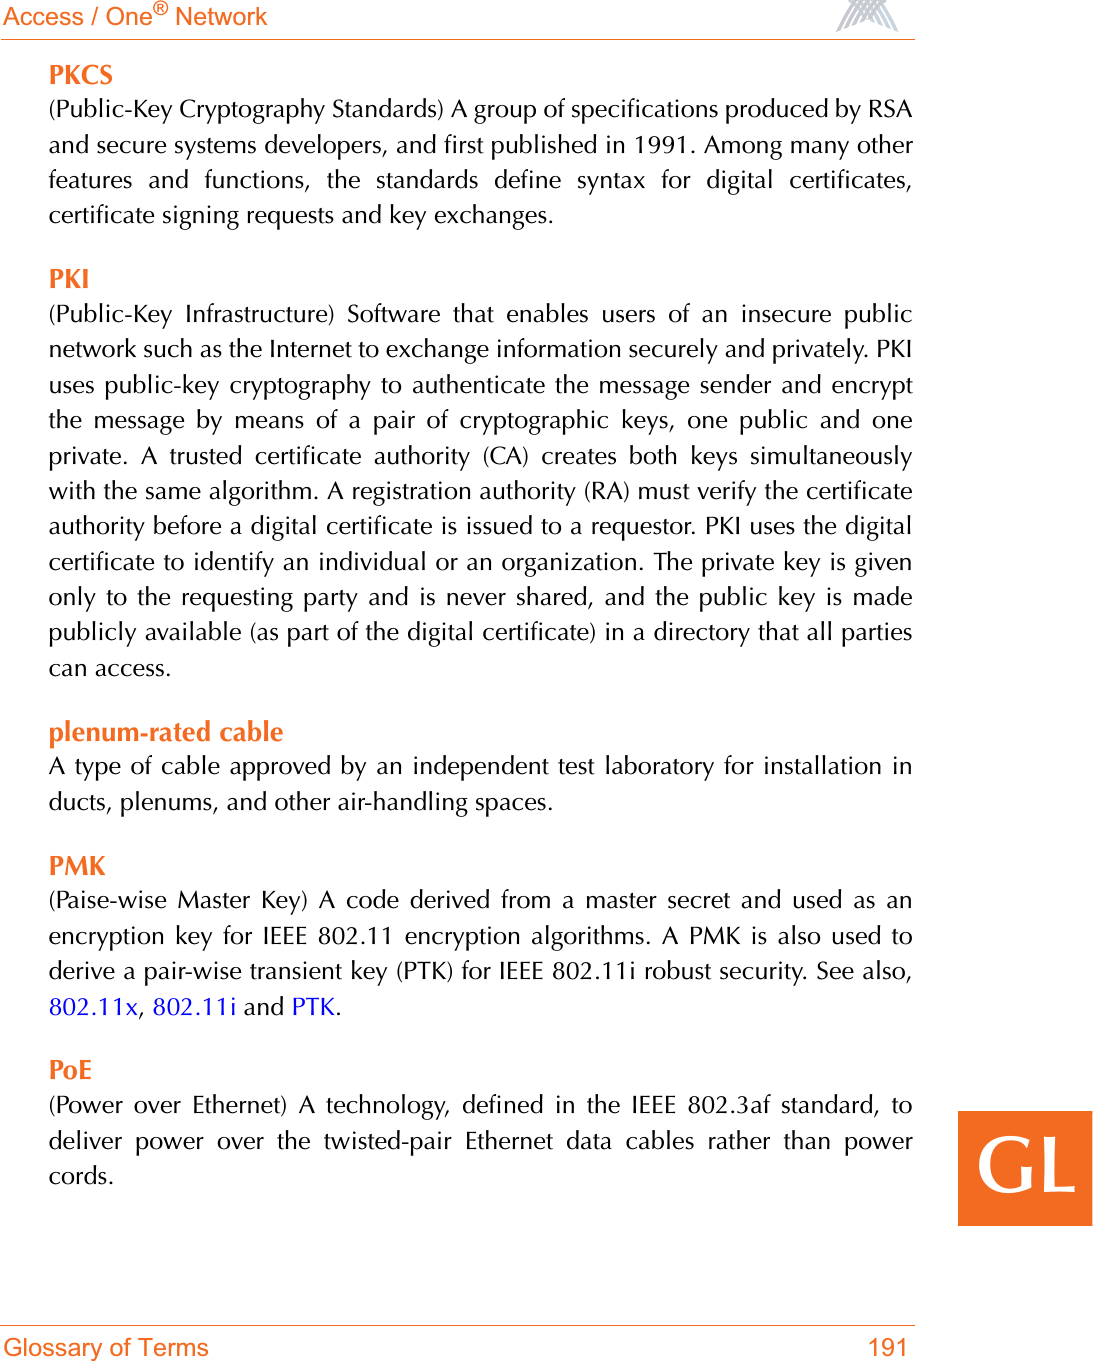 Access / One® NetworkGlossary of Terms 191GLPKCS(Public-Key Cryptography Standards) A group of specifications produced by RSAand secure systems developers, and first published in 1991. Among many otherfeatures and functions, the standards define syntax for digital certificates,certificate signing requests and key exchanges.PKI(Public-Key Infrastructure) Software that enables users of an insecure publicnetwork such as the Internet to exchange information securely and privately. PKIuses public-key cryptography to authenticate the message sender and encryptthe message by means of a pair of cryptographic keys, one public and oneprivate. A trusted certificate authority (CA) creates both keys simultaneouslywith the same algorithm. A registration authority (RA) must verify the certificateauthority before a digital certificate is issued to a requestor. PKI uses the digitalcertificate to identify an individual or an organization. The private key is givenonly to the requesting party and is never shared, and the public key is madepublicly available (as part of the digital certificate) in a directory that all partiescan access.plenum-rated cableA type of cable approved by an independent test laboratory for installation inducts, plenums, and other air-handling spaces.PMK(Paise-wise Master Key) A code derived from a master secret and used as anencryption key for IEEE 802.11 encryption algorithms. A PMK is also used toderive a pair-wise transient key (PTK) for IEEE 802.11i robust security. See also,802.11x,802.11i and PTK.PoE(Power over Ethernet) A technology, defined in the IEEE 802.3af standard, todeliver power over the twisted-pair Ethernet data cables rather than powercords.